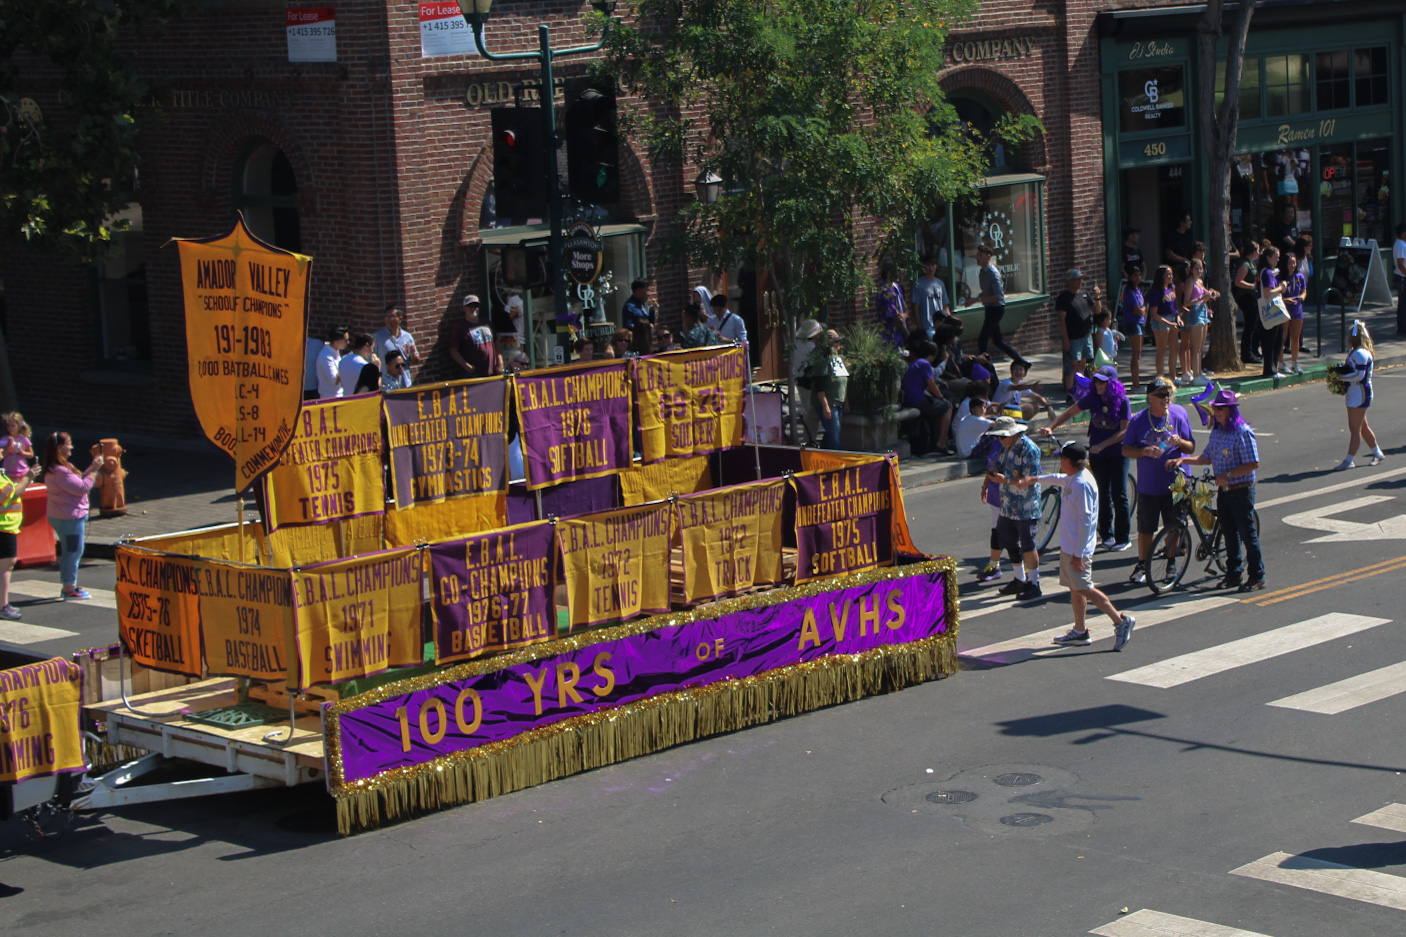 The+centennial+parade+in+pictures